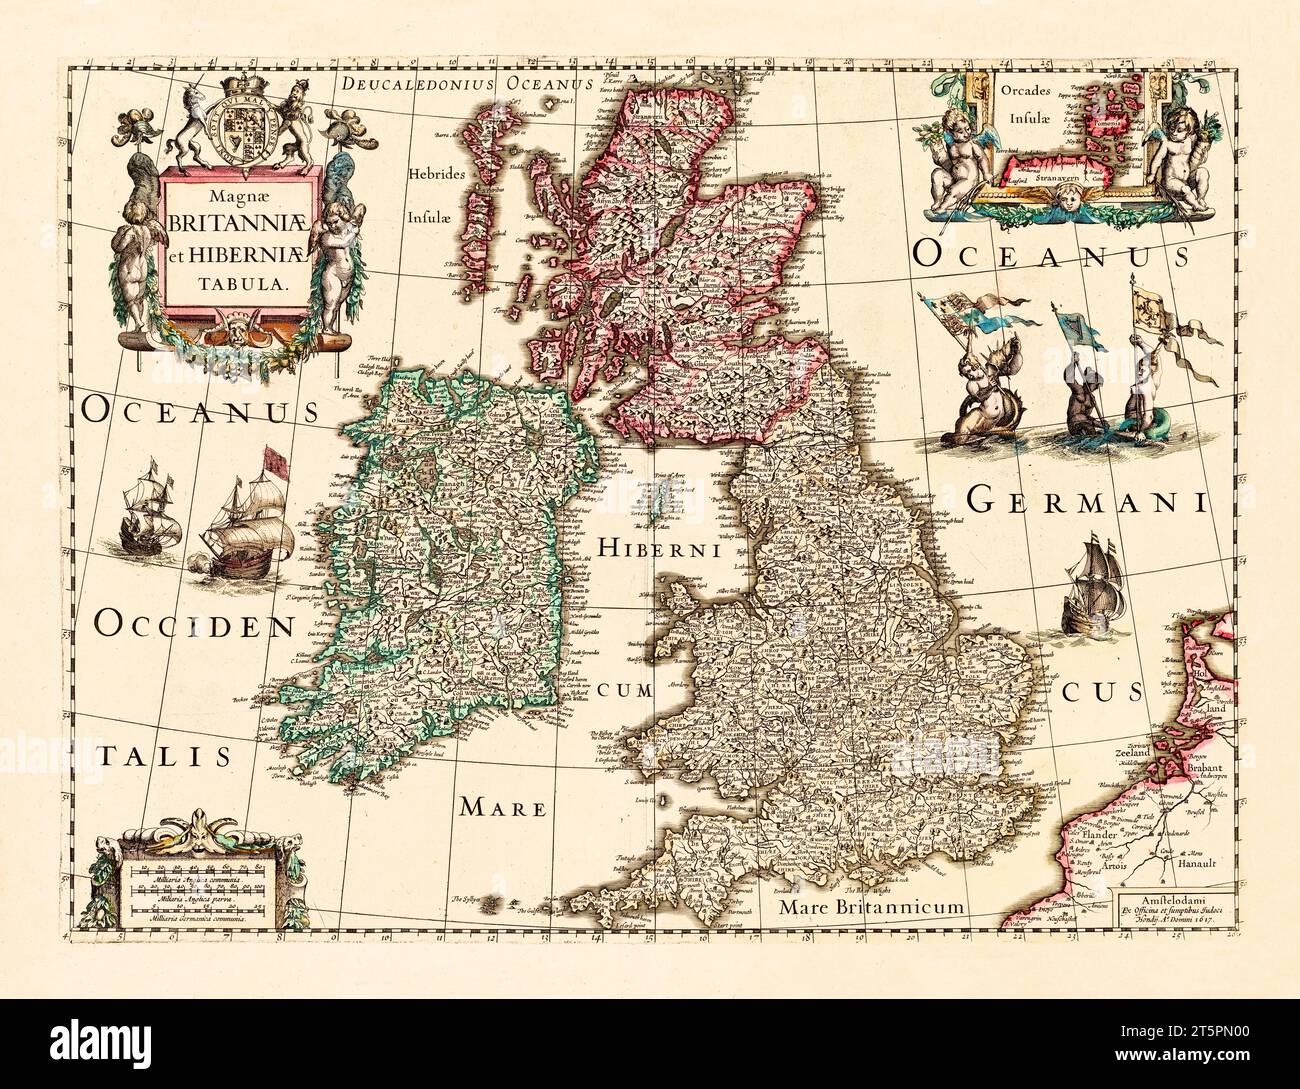 Great Britain and Ireland old map. By Hondius, publ. In 1617 Stock Photo